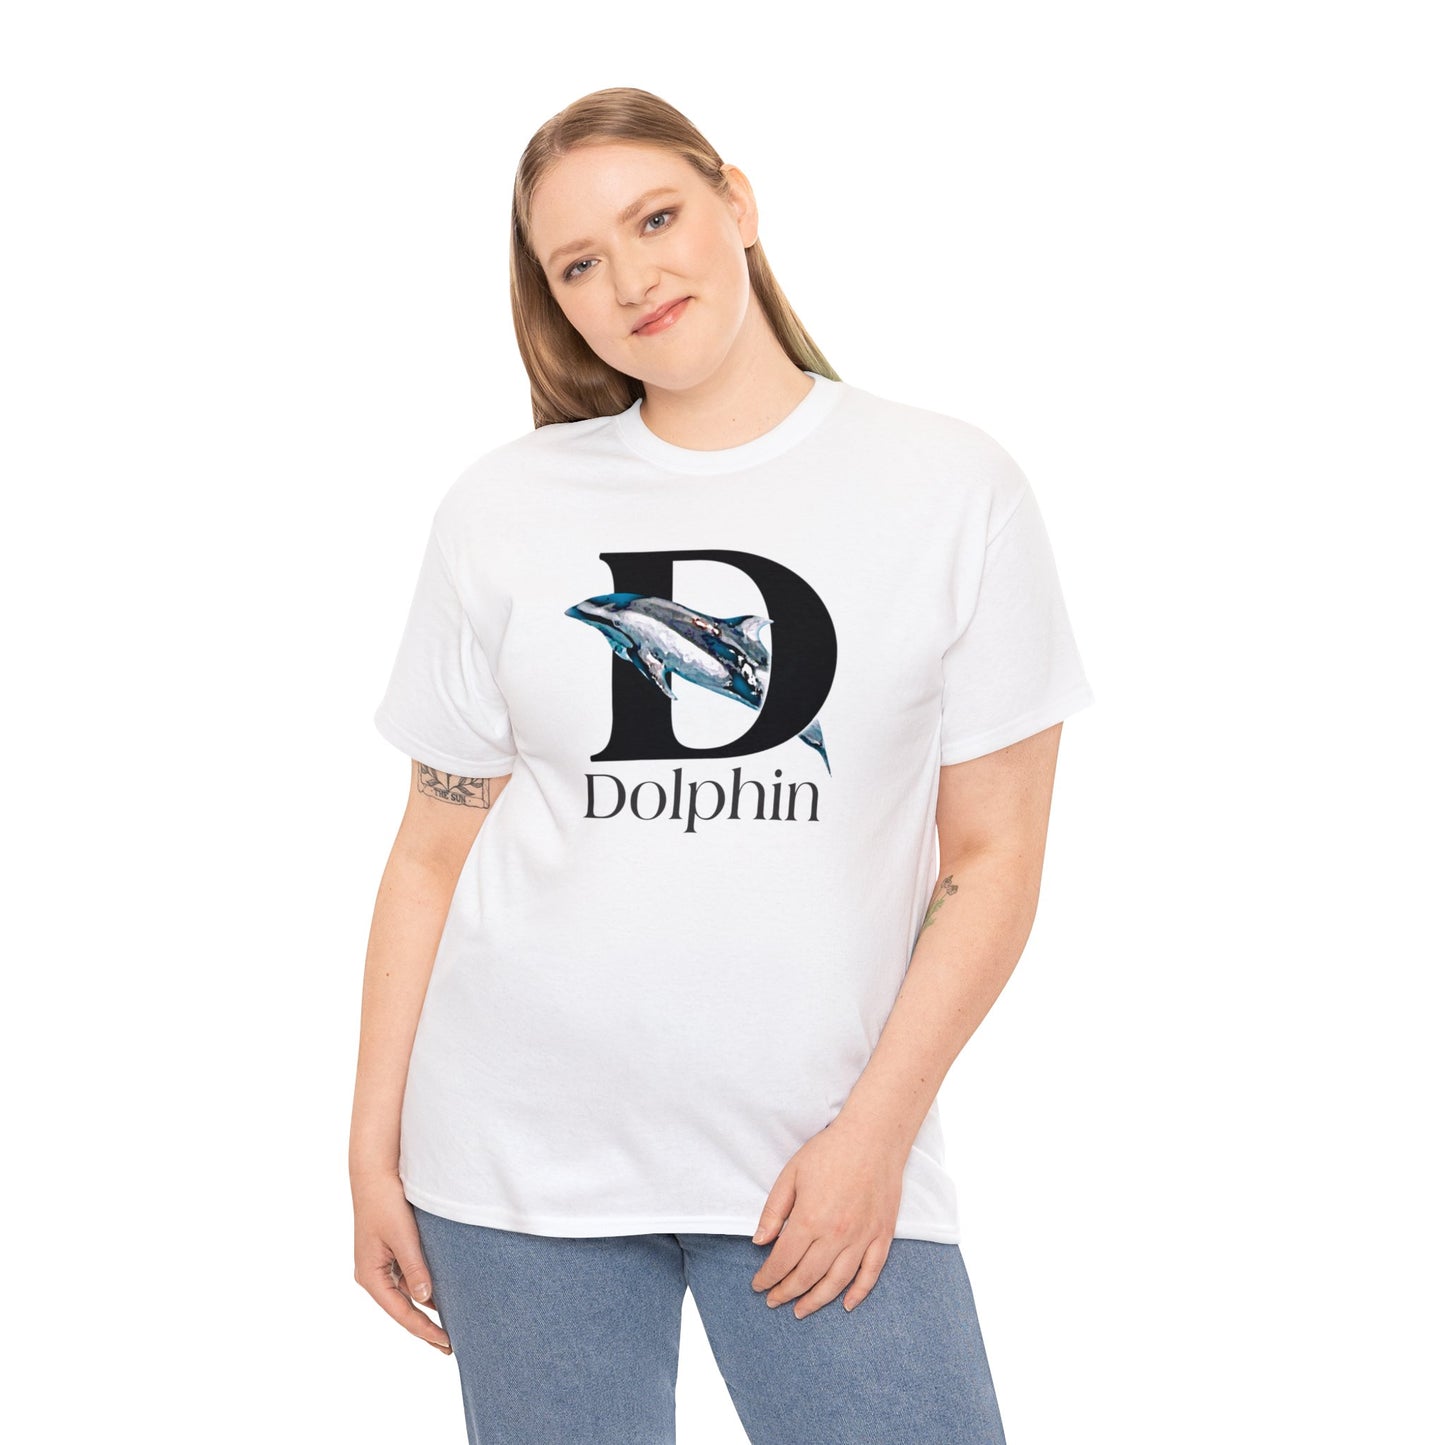 D is for Dolphin T-Shirt, Dolphin Drawing T-Shirt, Dolphin Lovers shirt, Dolphin illustration